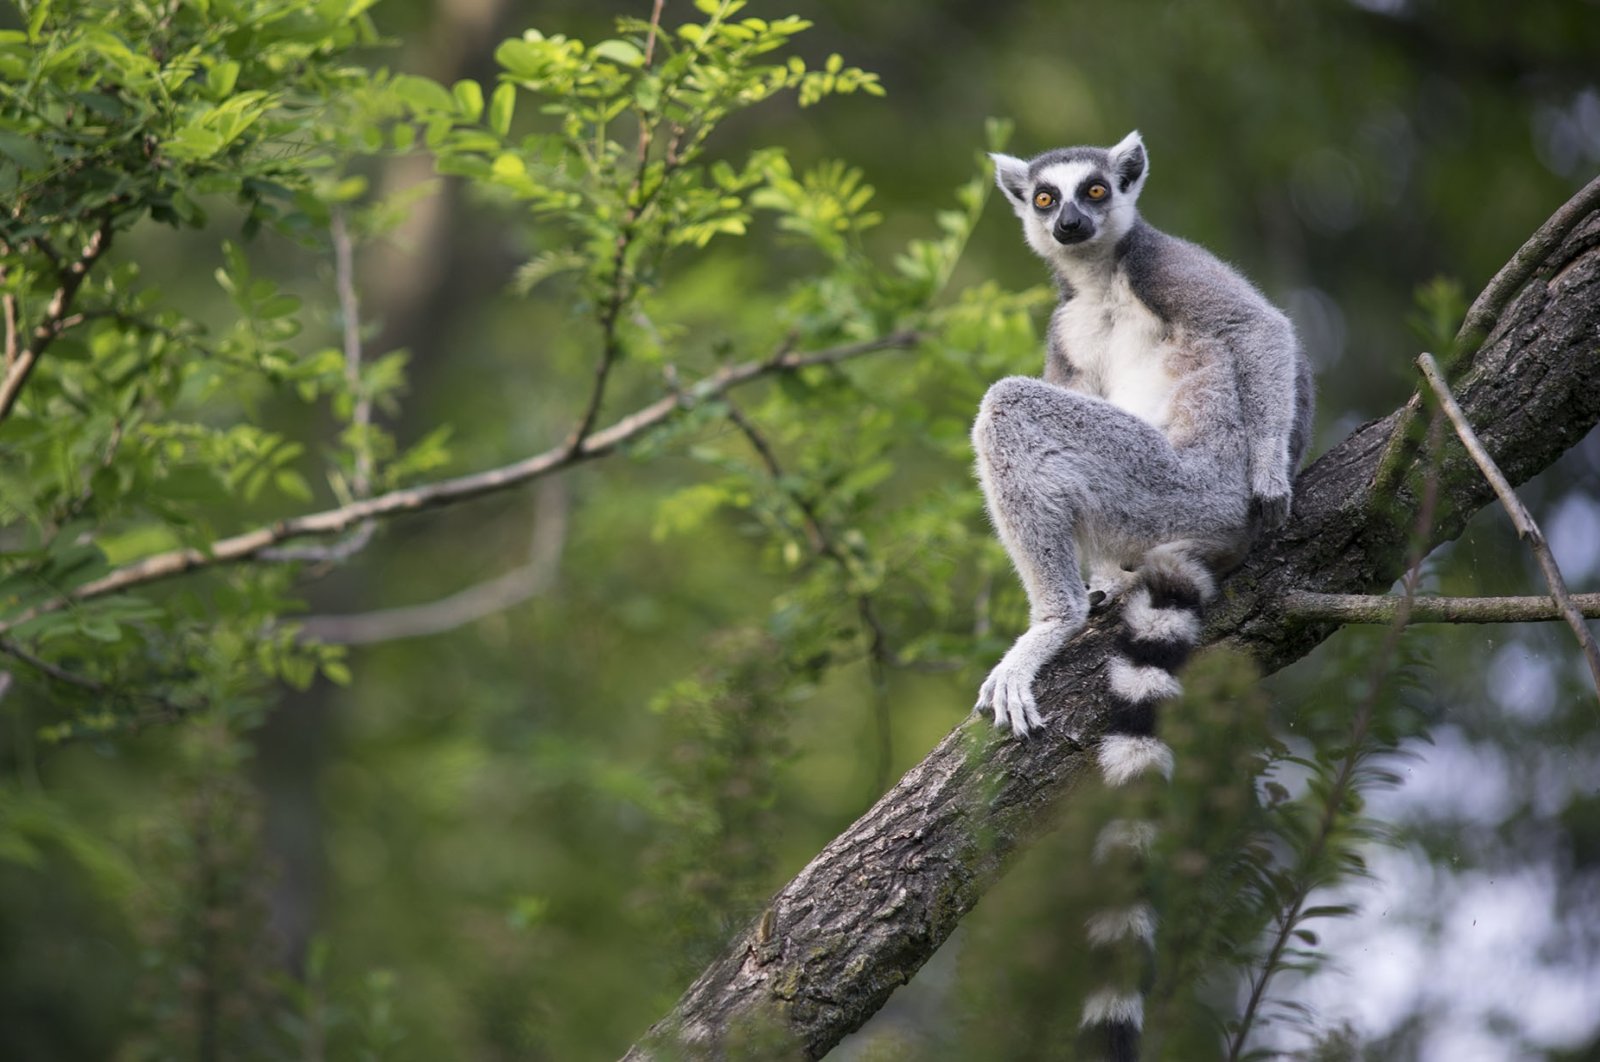 A lemur of Madagascar which could go extinct as a species. (Shutterstock Photo)